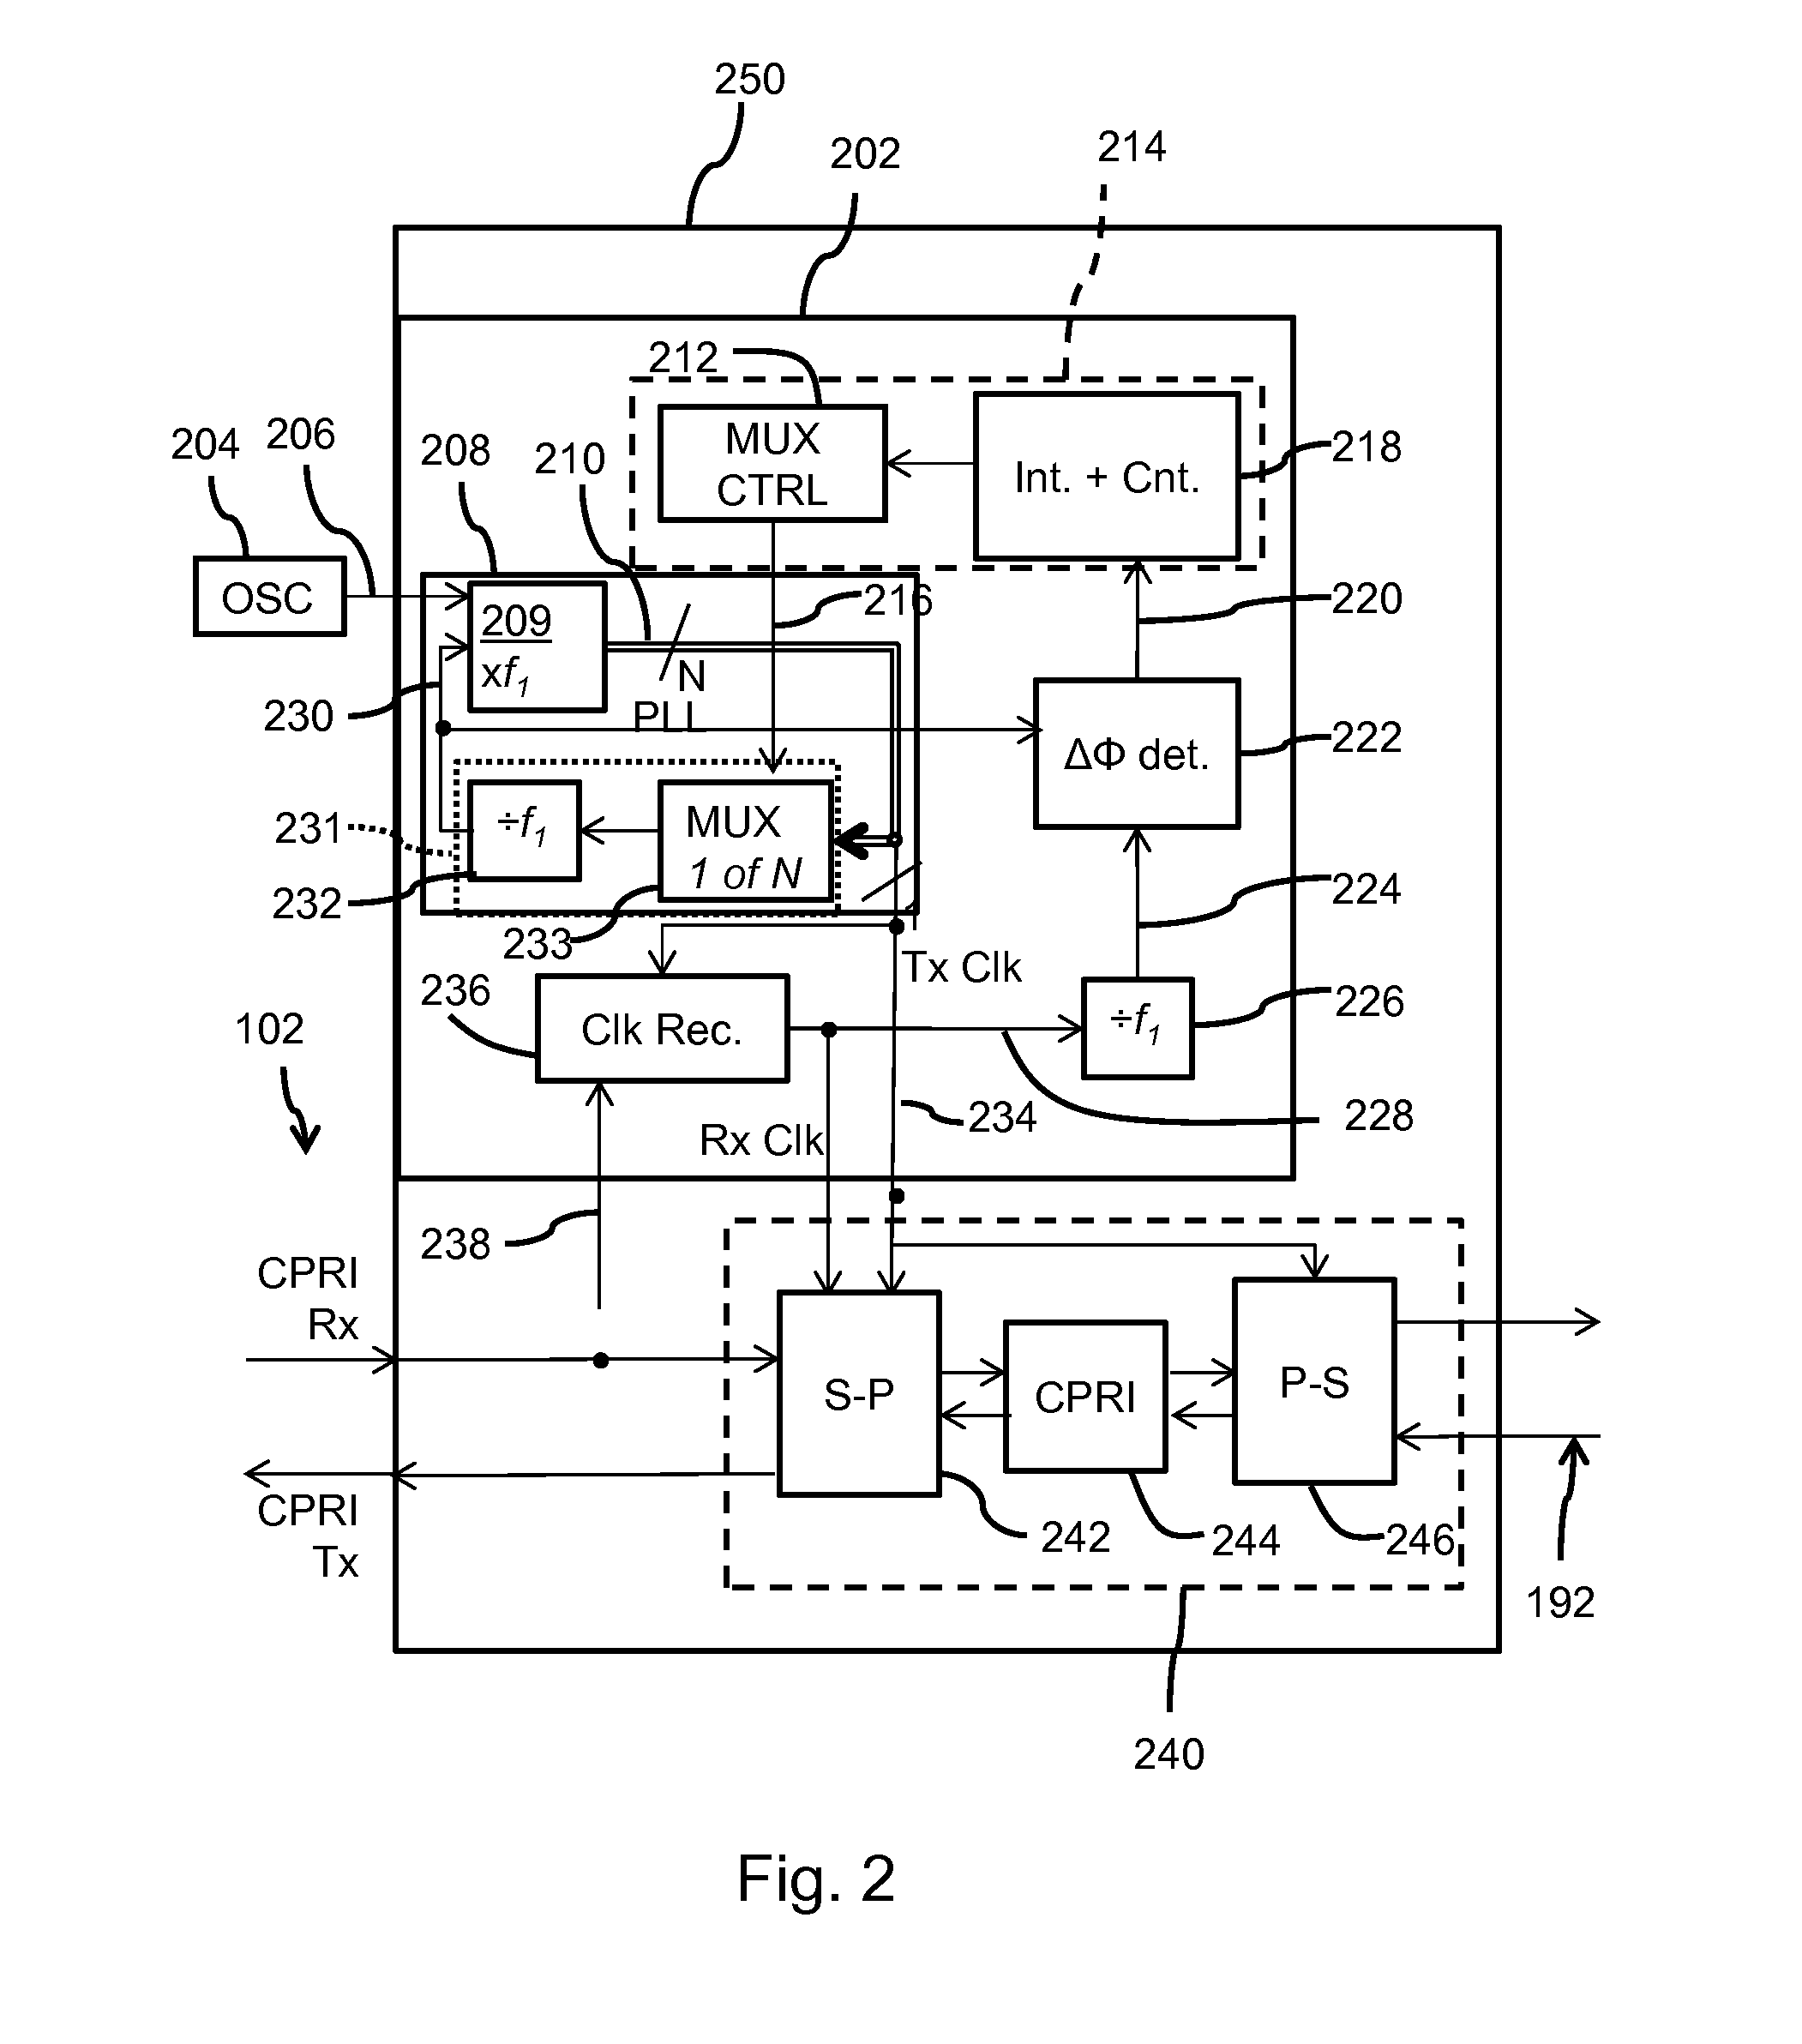 Synchronization circuitry, common public radio interface enable device, and a method of synchronizing a synchronized clock signal of a second transceiver to a clock of a first transceiver